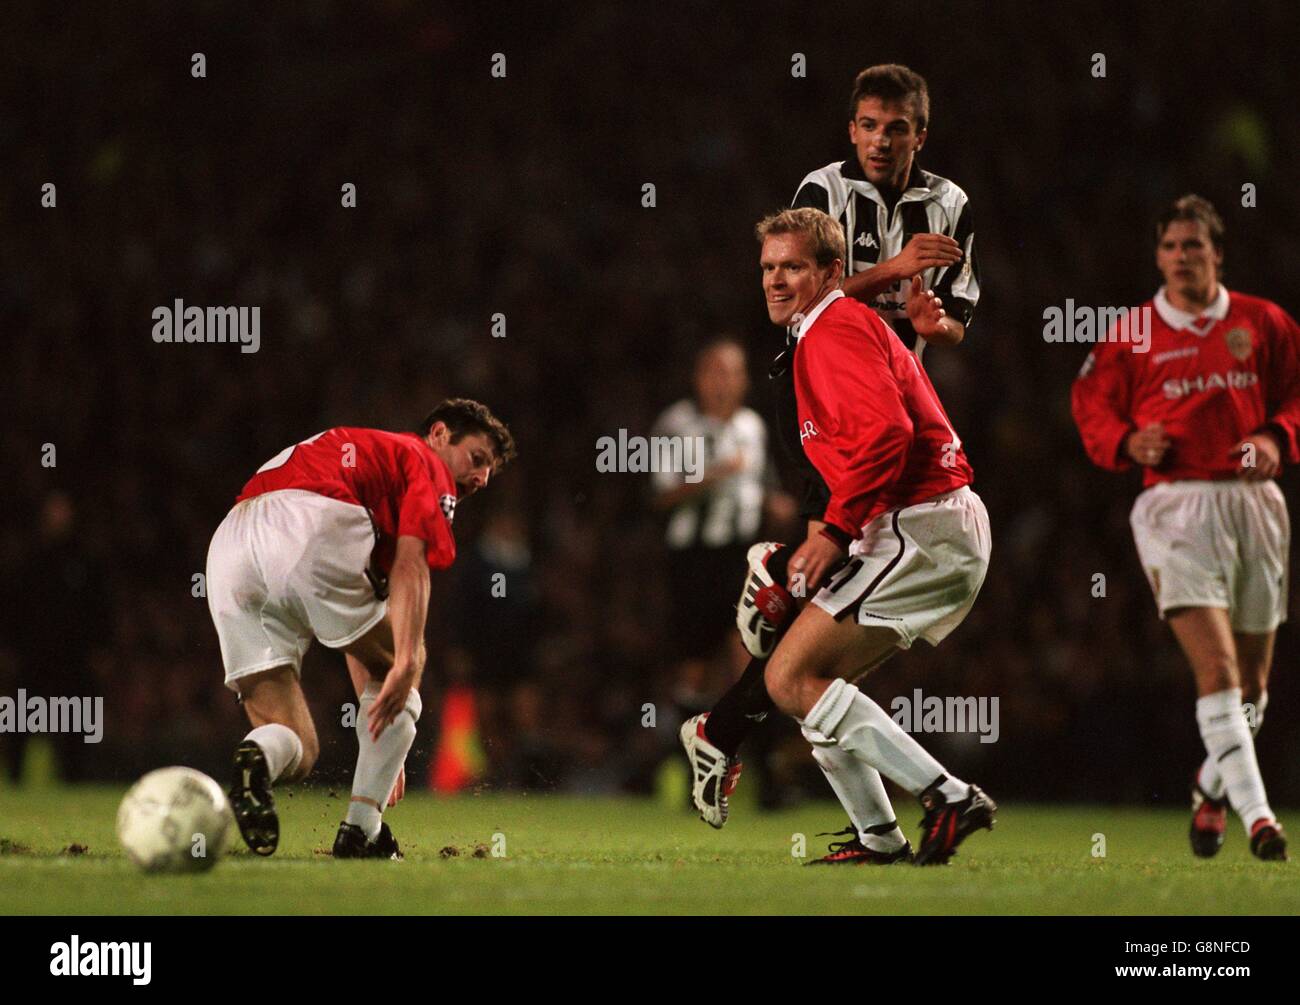 Juventus's Alessandro Del Piero (second right) knocks the ball between Manchester United's Henning Berg (second left) and Denis Irwin (left) as Manchester United's David Beckham (right) watches Stock Photo